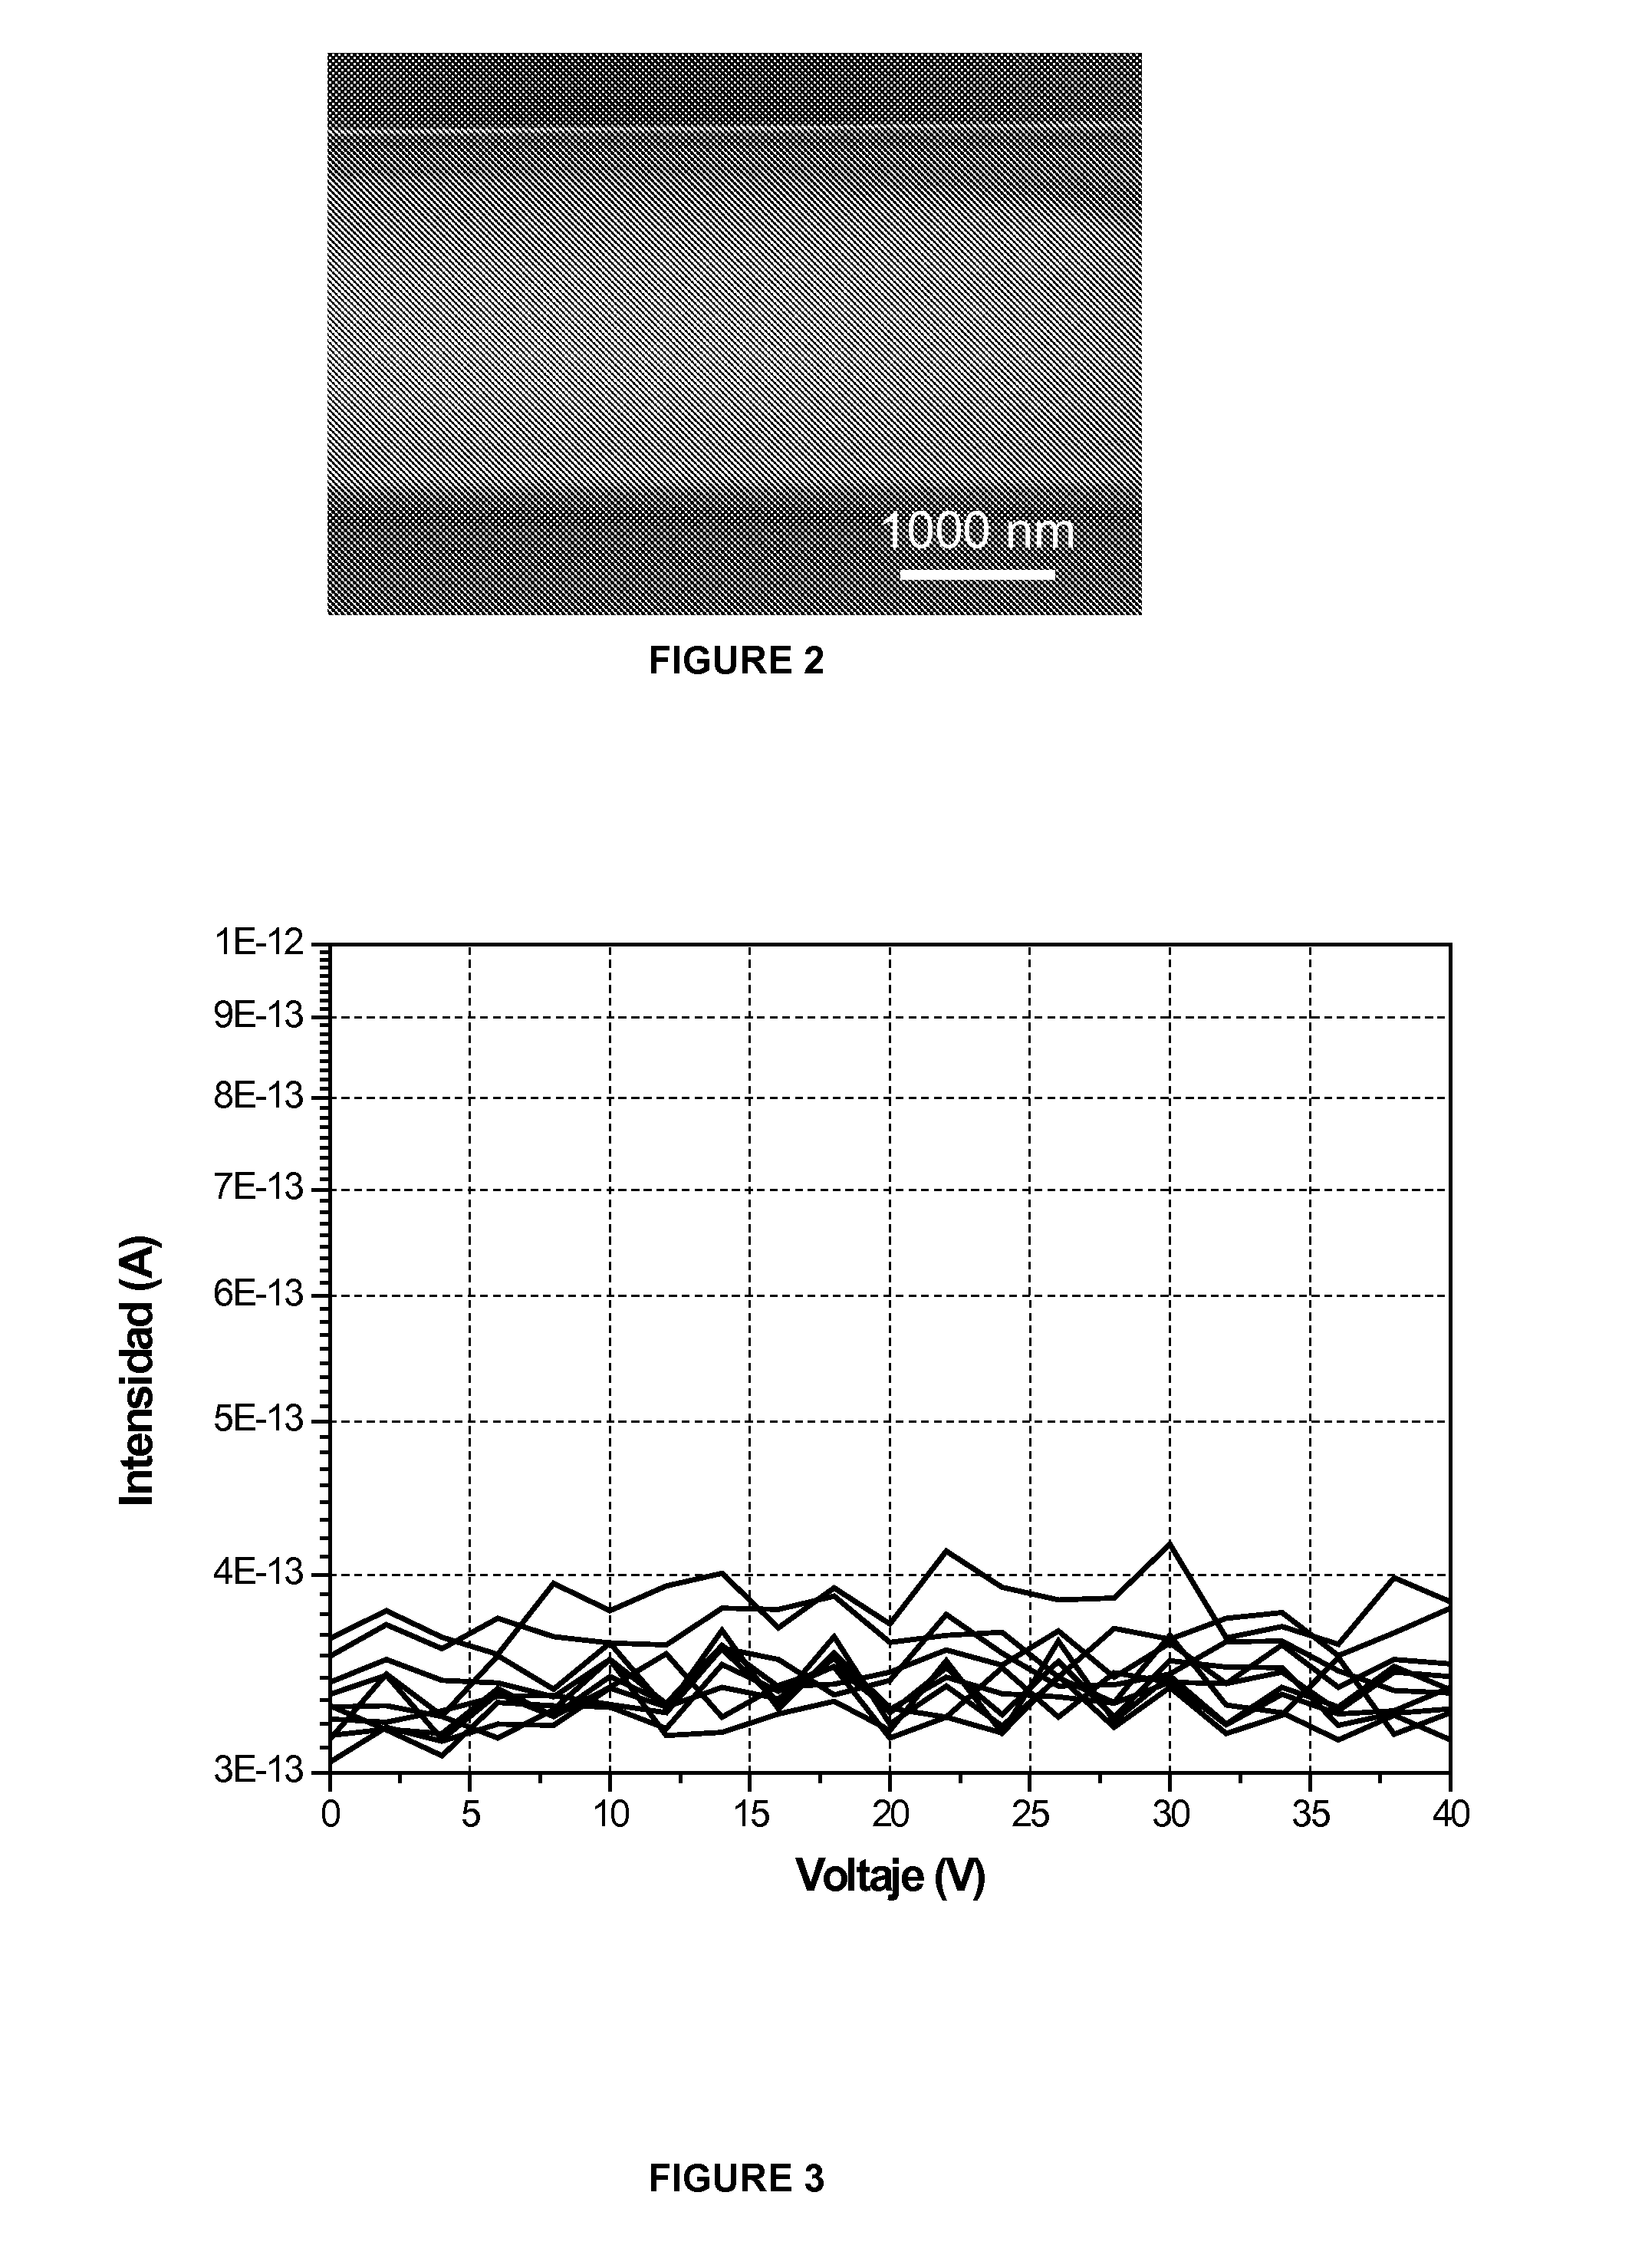 Method for producing a dielectric and/or barrier layer or multilayer on a substrate, and device for implementing said method